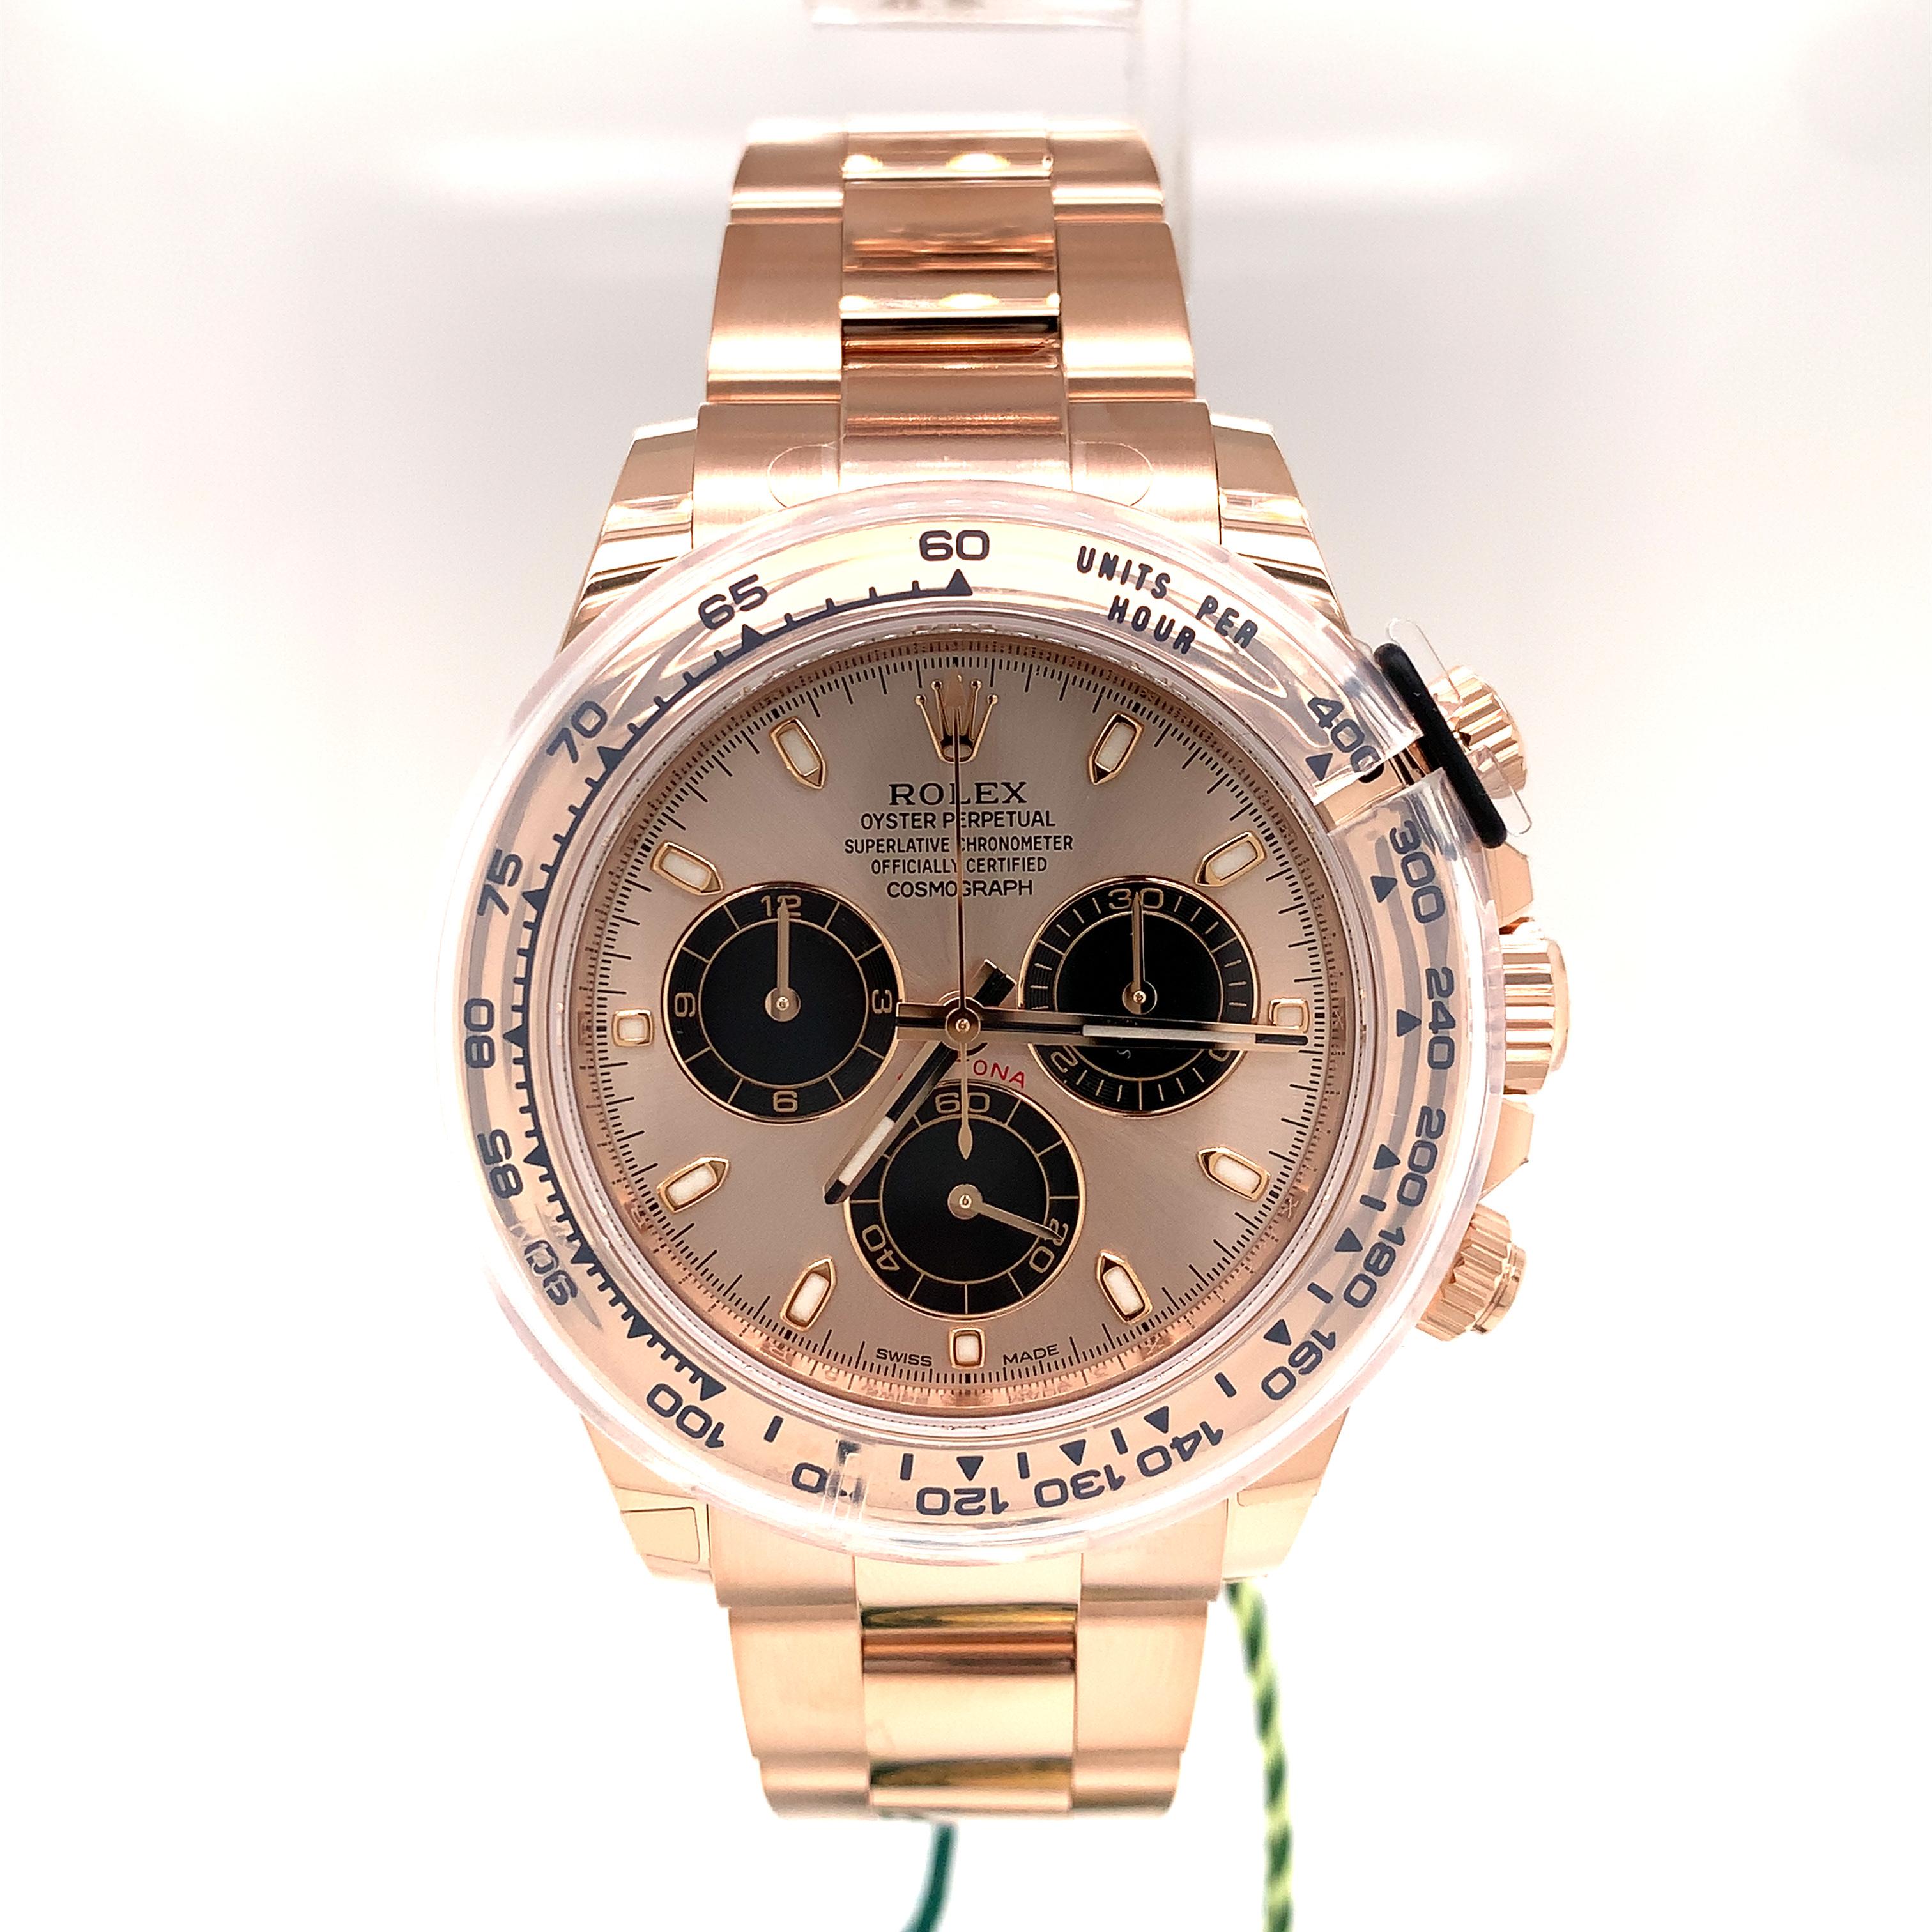 This Rolex Oyster Perpetual Cosmograph Daytona in 18 ct rose gold, with white mother-of-pearl, diamond-set dial, and an Oyster bracelet, features an 18 ct rose gold bezel with engraved tachymetric scale. This chronograph was designed to be the